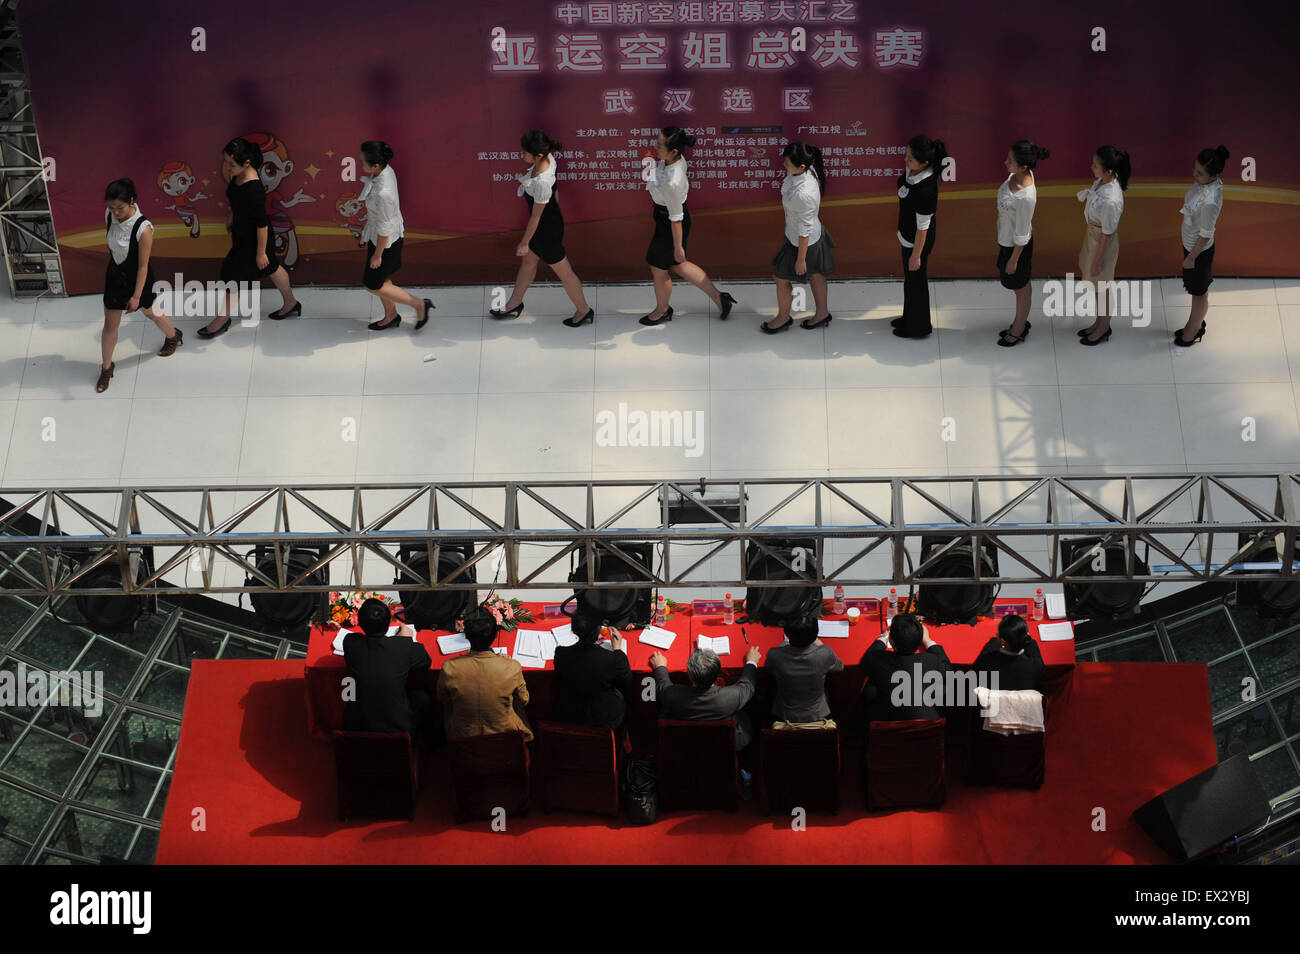 Candidates attend an etiquette test during a job fair recruiting the airline attendants for the 2010 Guangzhou Asian Games in Wu Stock Photo